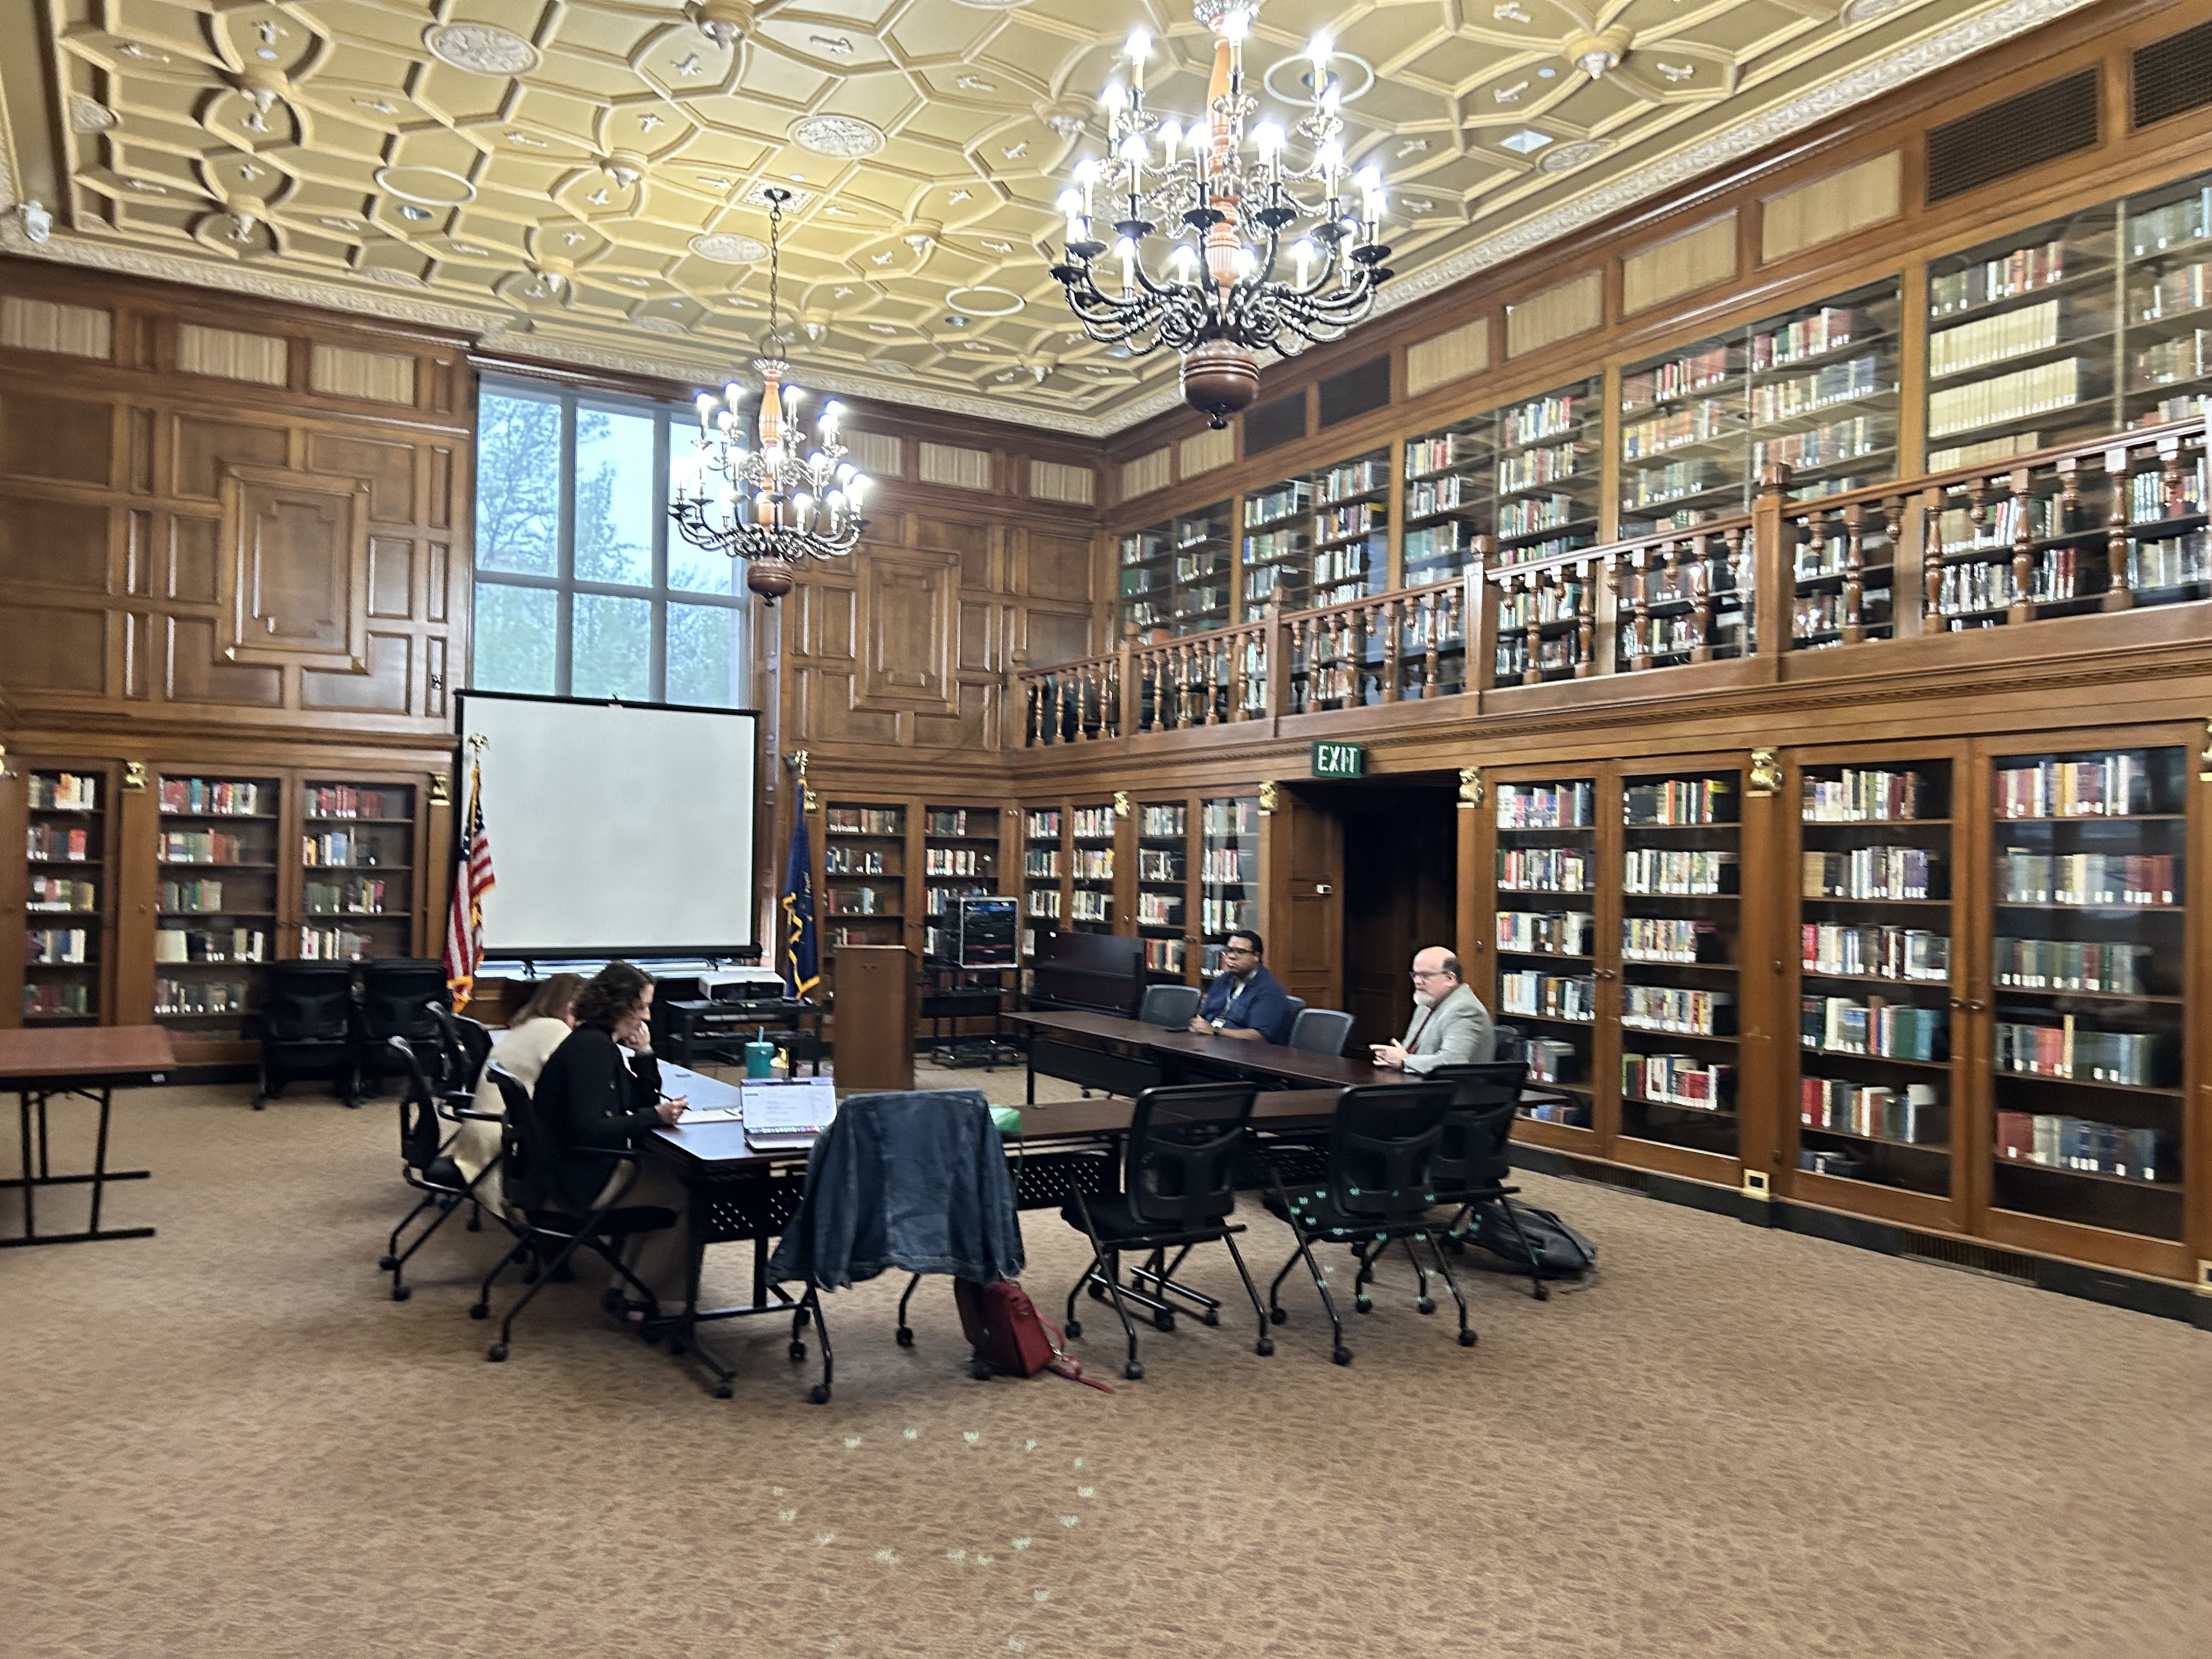 The Indiana Authors Room at the Indiana State Library has wooden book shelves lining the walls filled with books behind glass doors. In the center of the room is a u-shaped table setup with chairs in front of a projection screen.